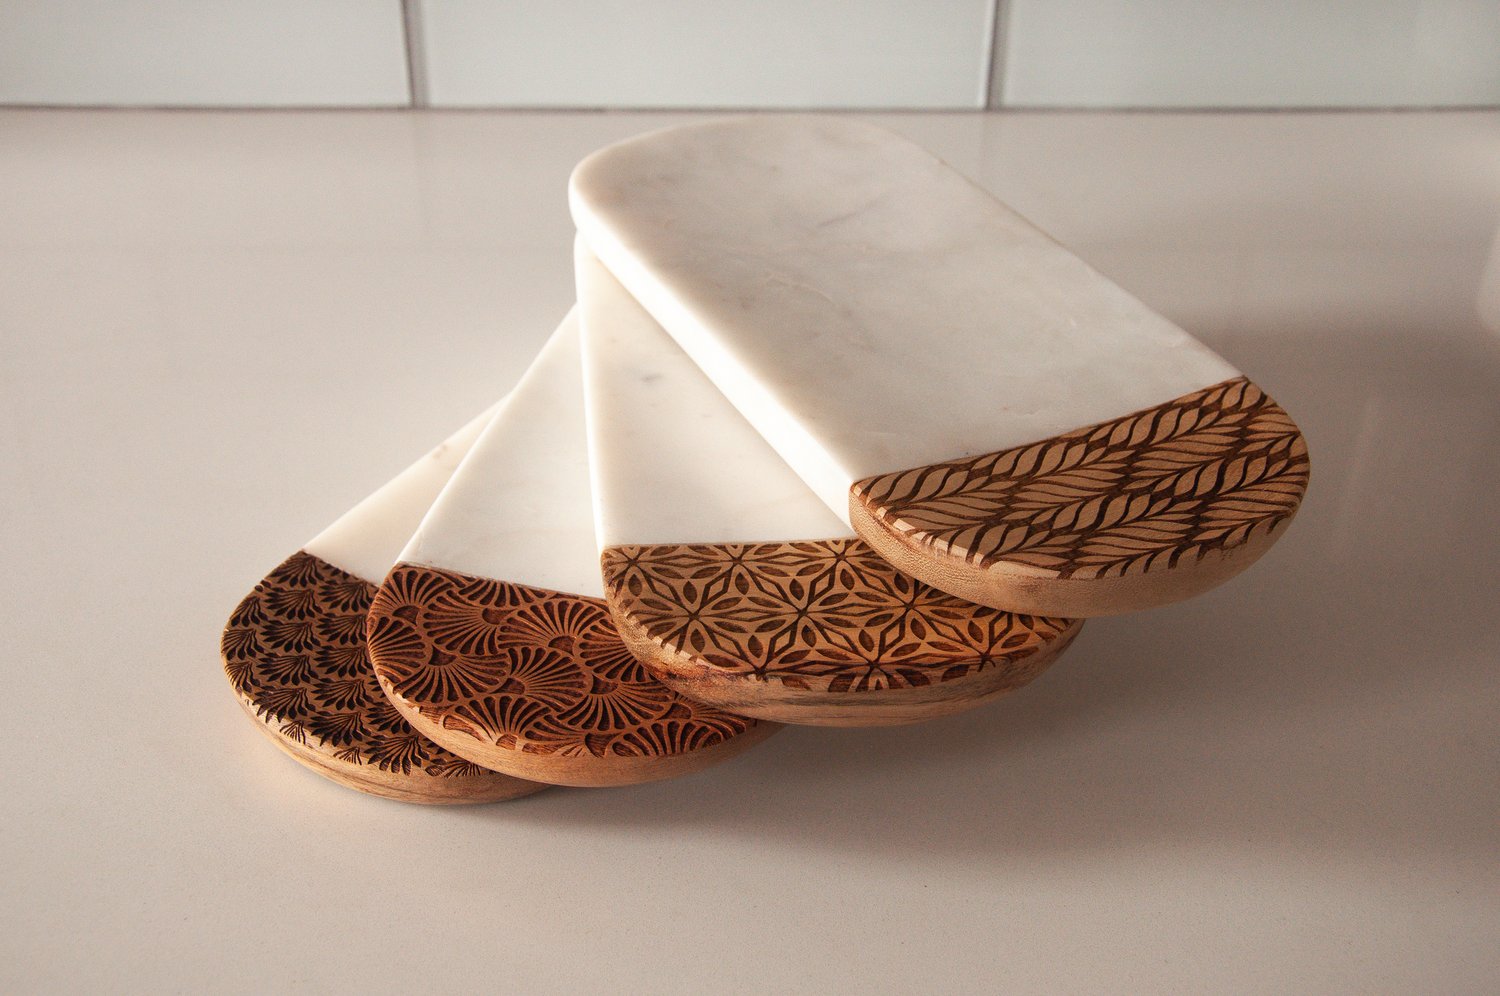 Shop Oval Marble and Wood Jewelry / Serving Tray from Lucca on Openhaus